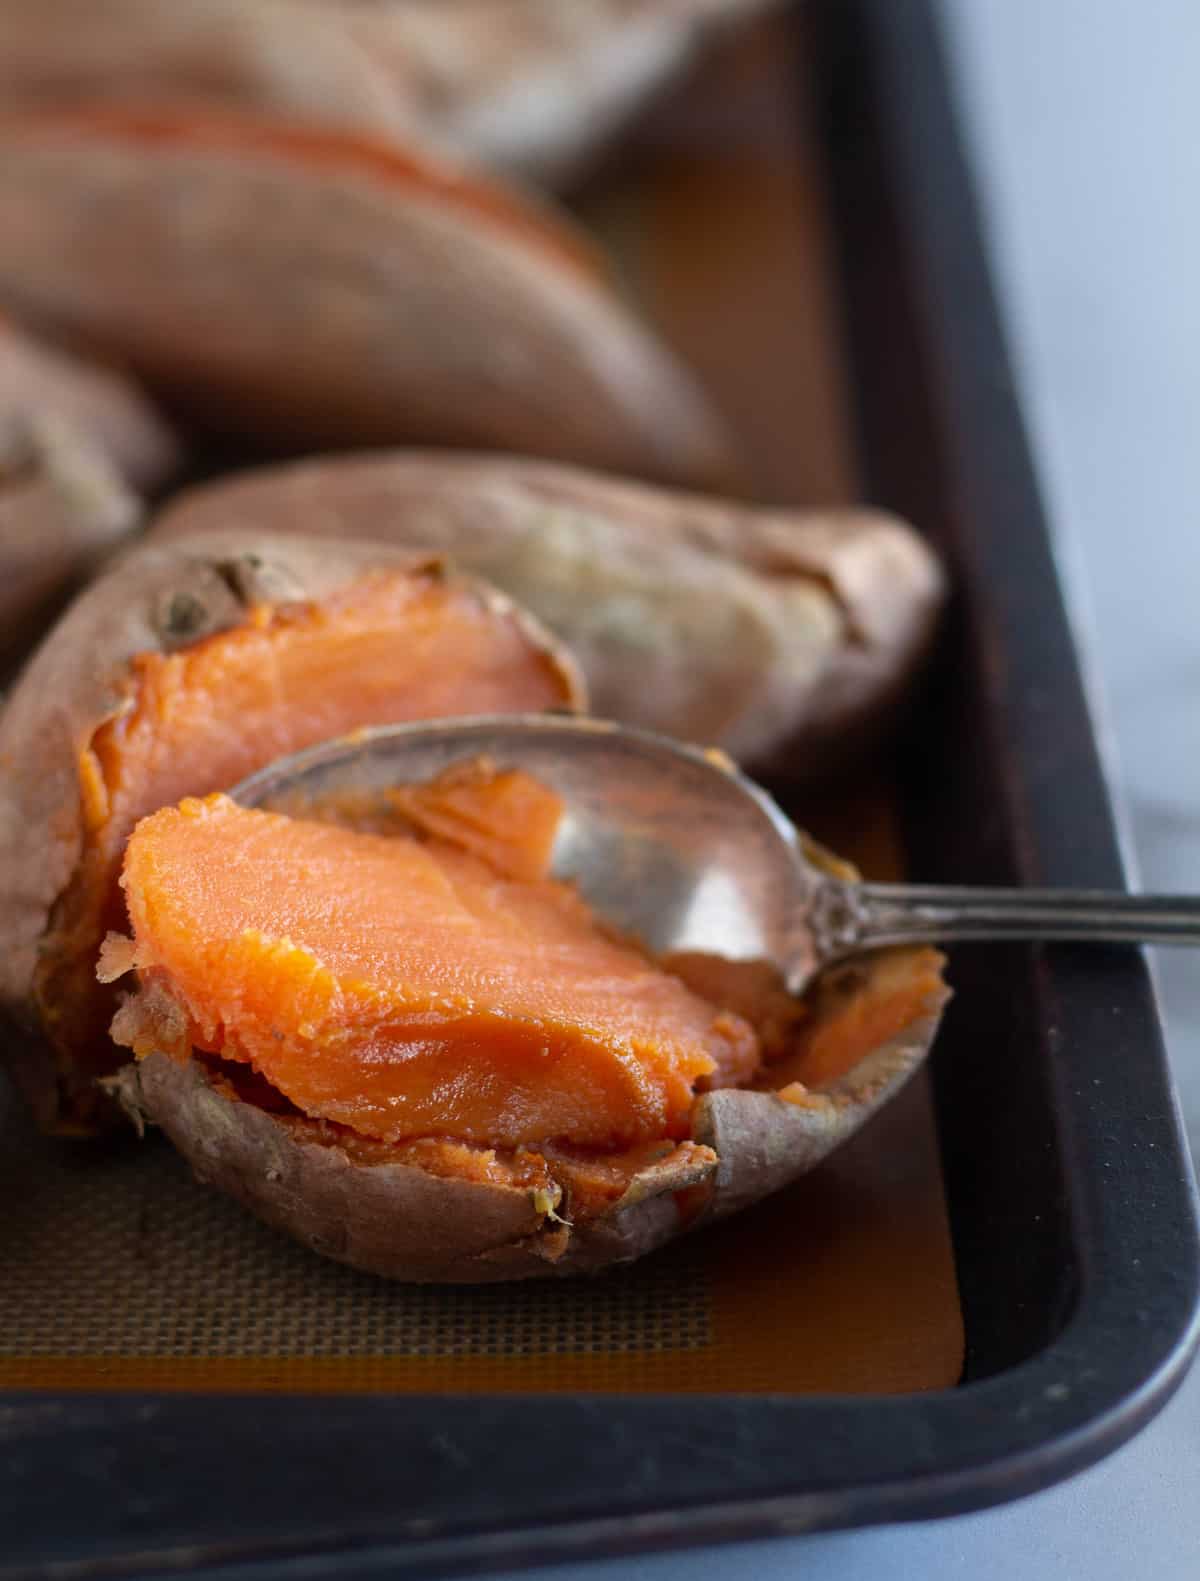 scooping out the flesh of a baked sweet potato